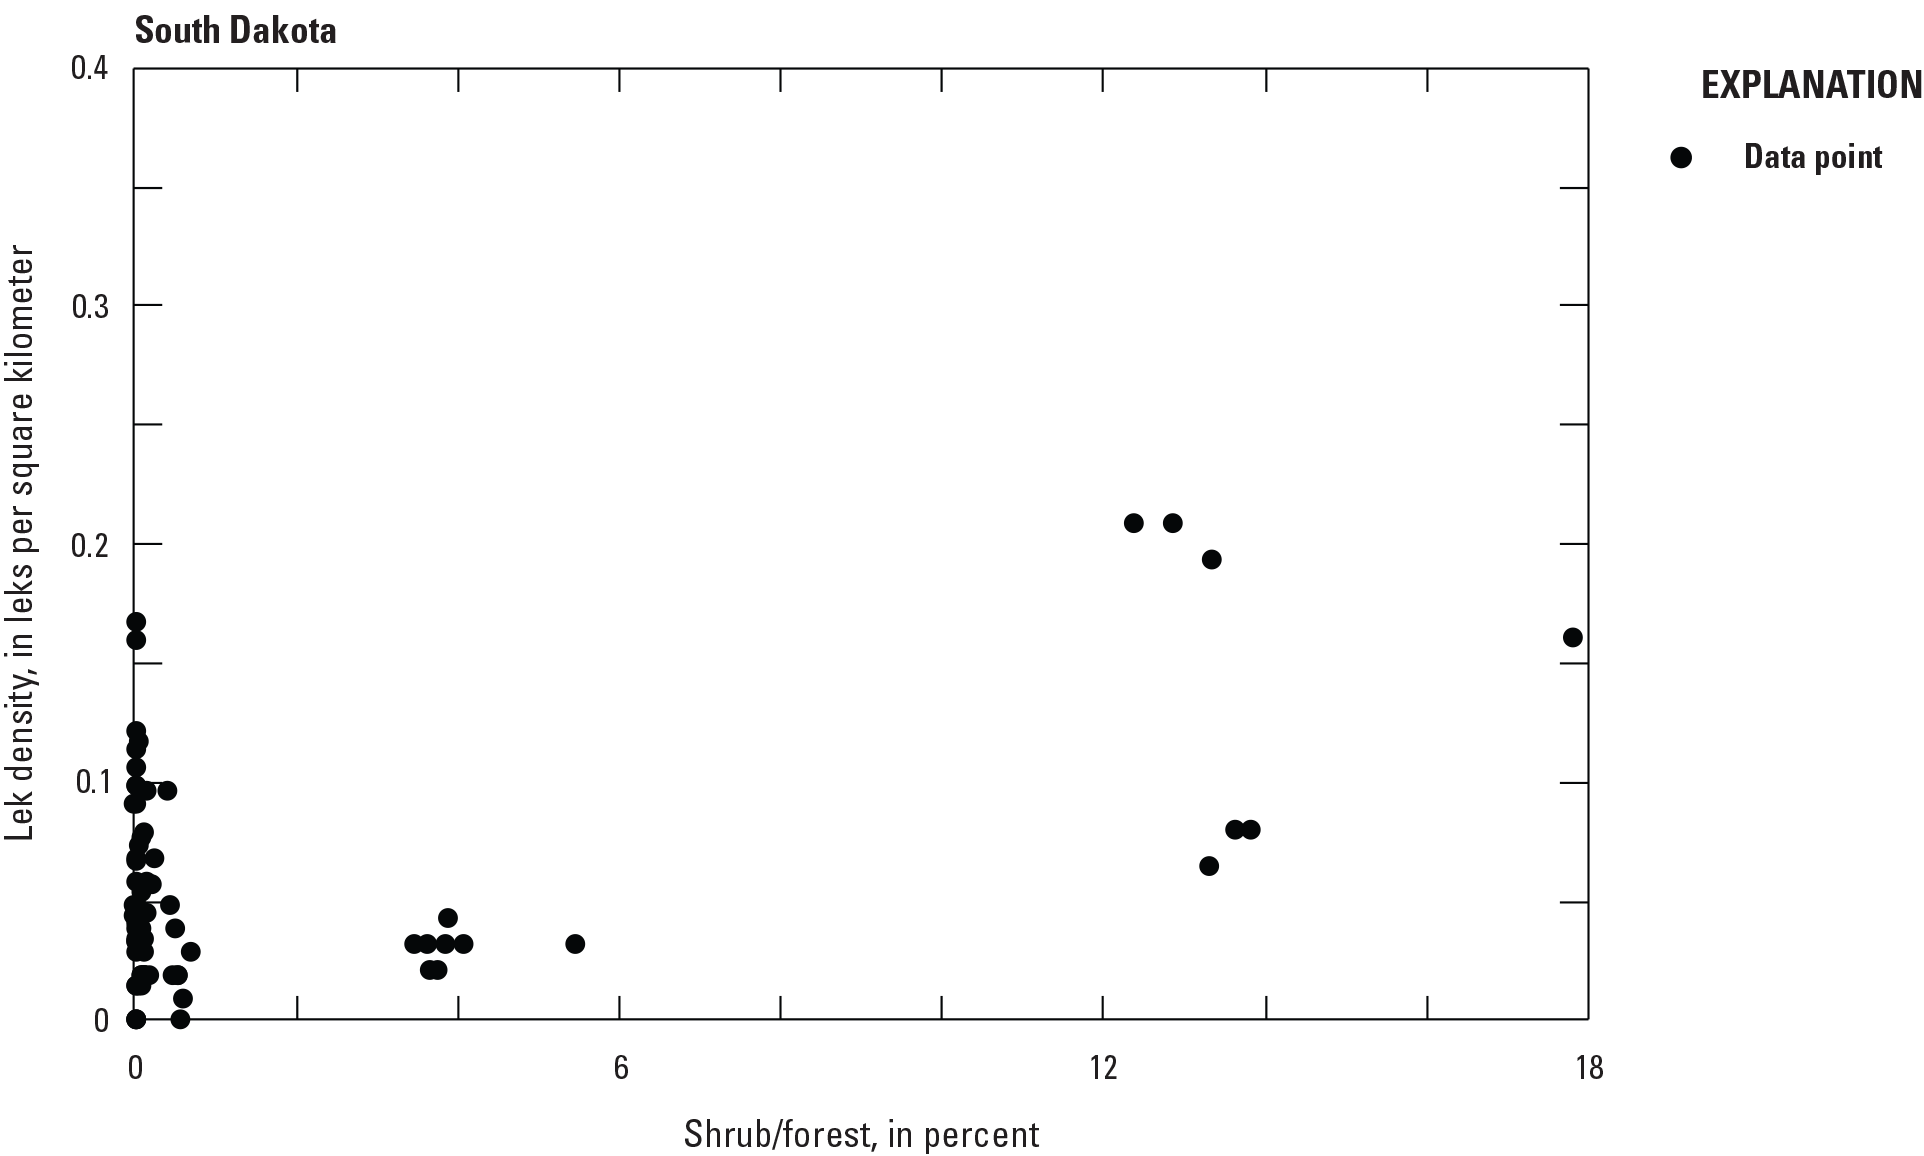 Lek density is varied with percentage of shrub/forest